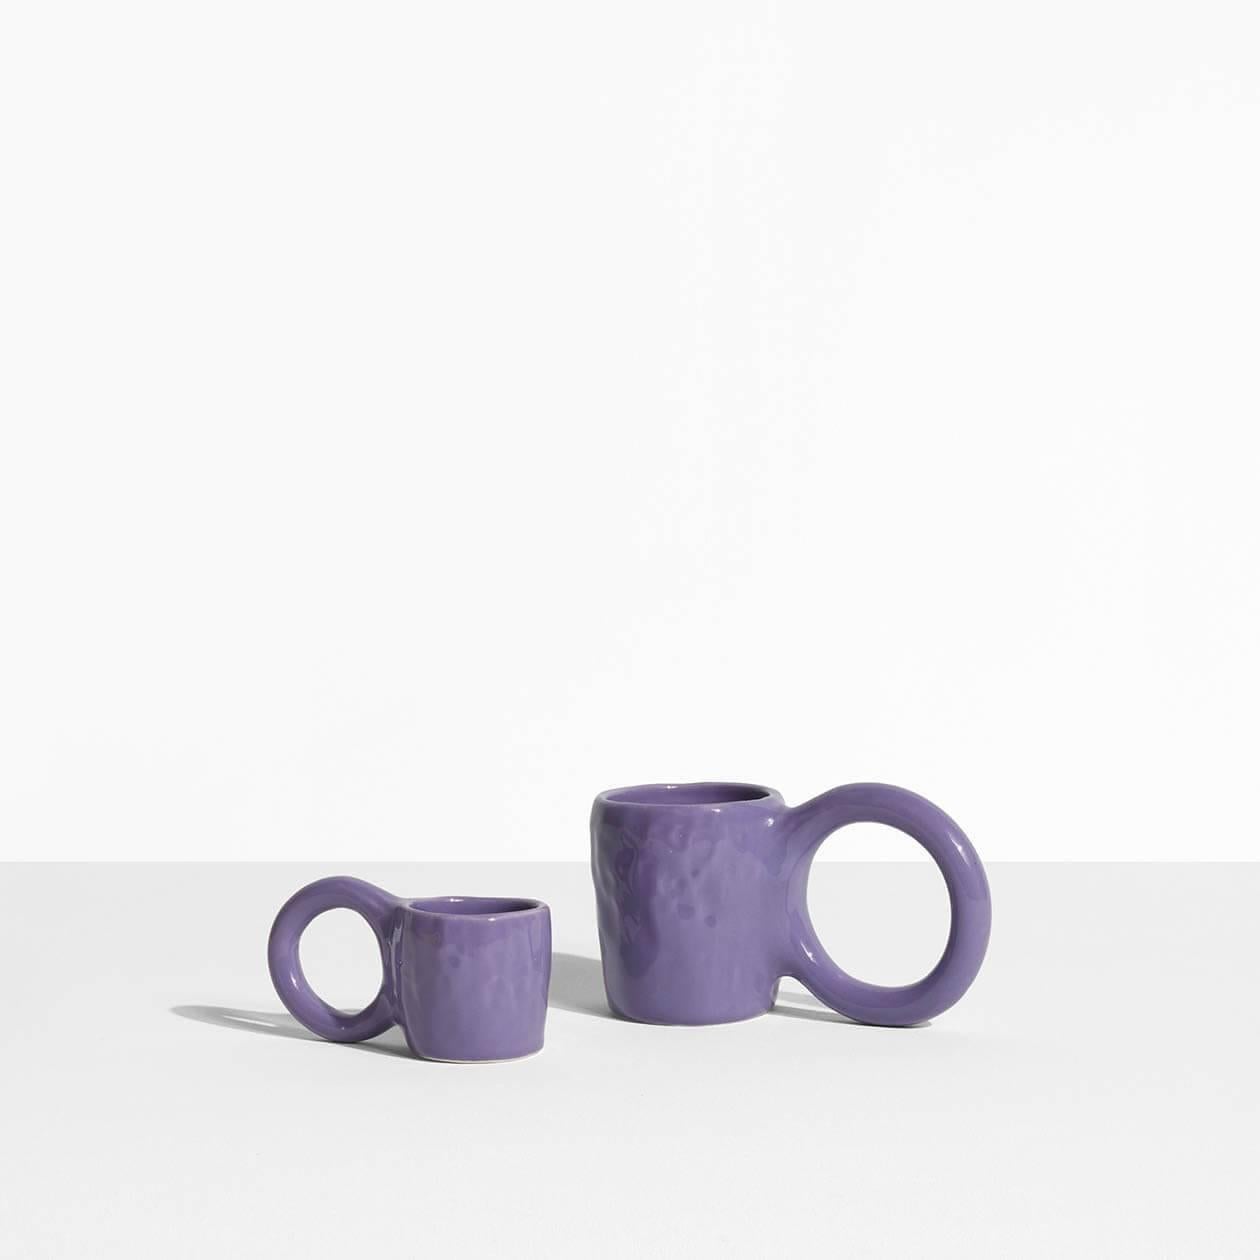 Glazed PETITE FRITURE Donut, Set of 2 Espresso, Blueberry, Designed by Pia Chevalier For Sale